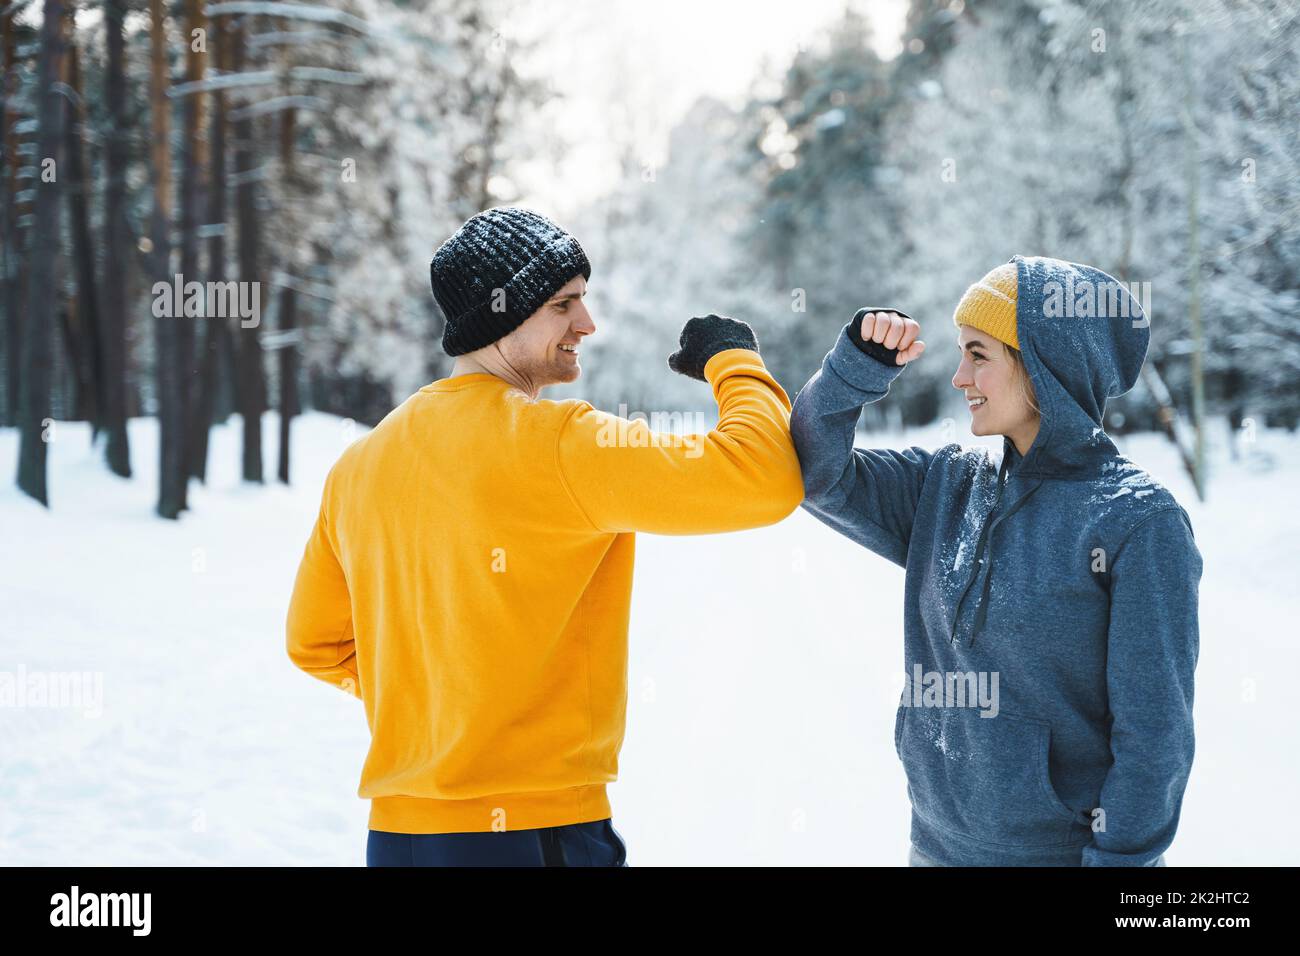 Two joggers greeting each other with a elbow bump gesture during winter workout Stock Photo